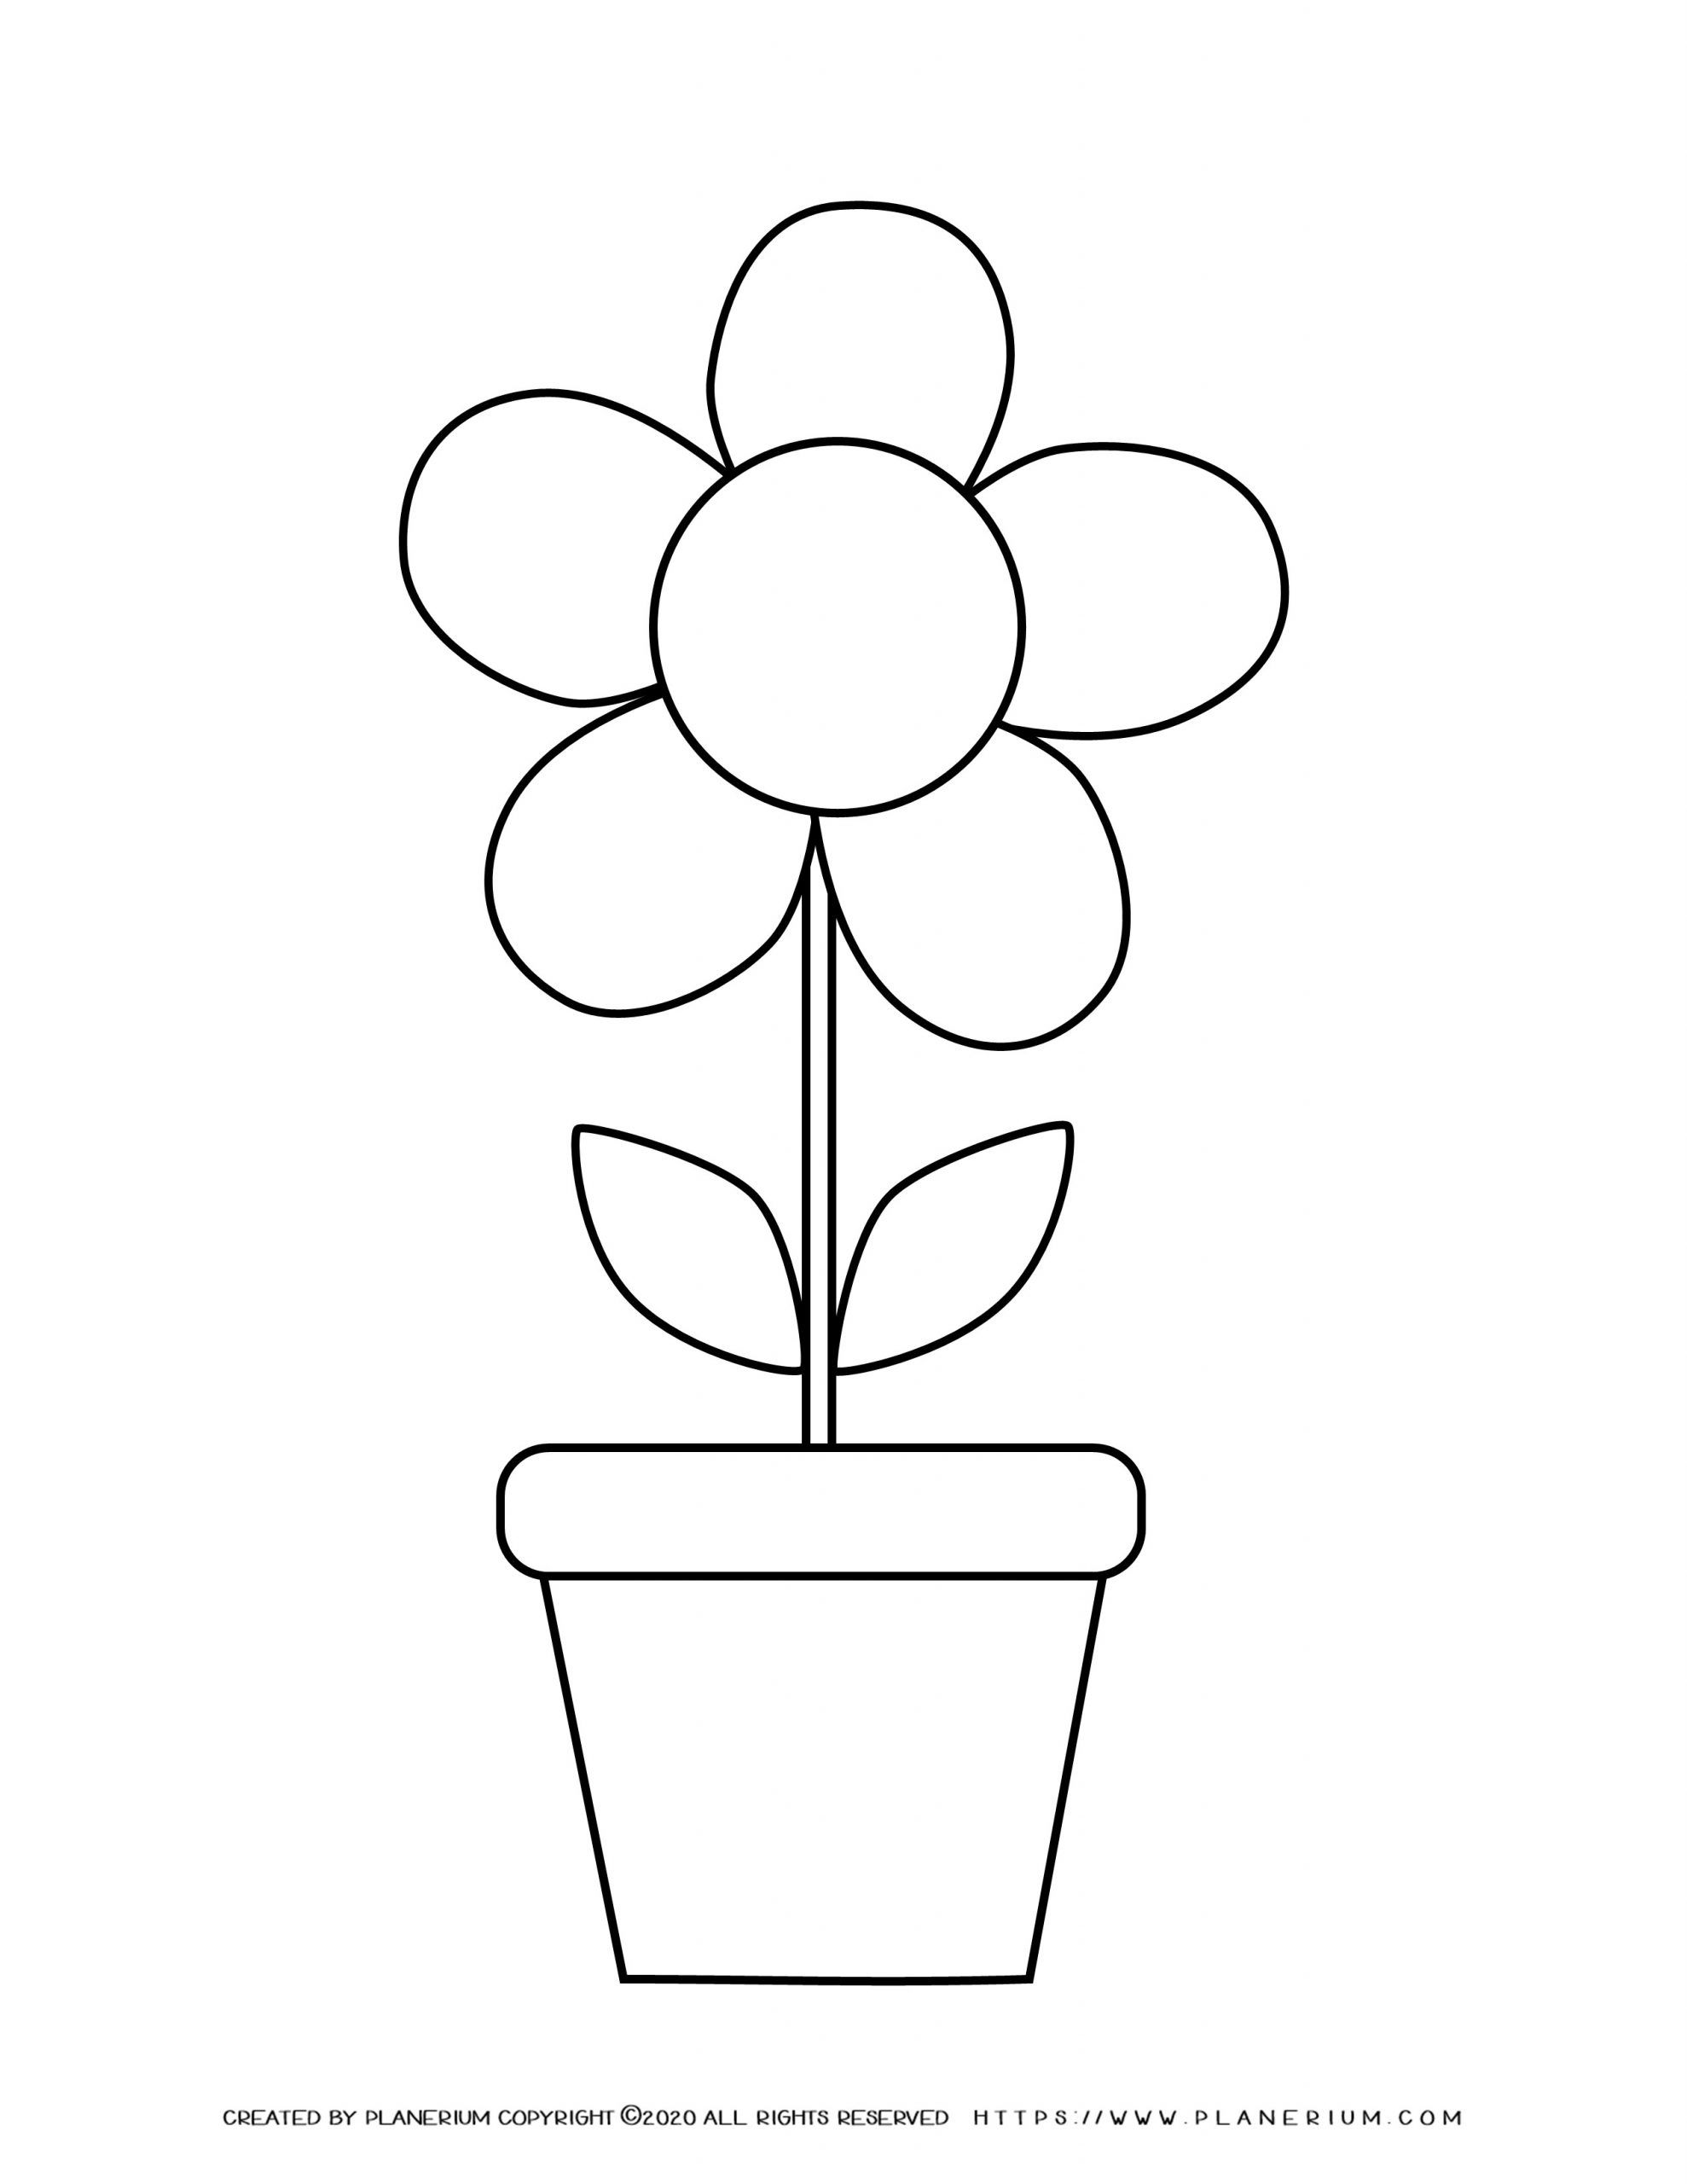 Flower In A Pot Coloring Page   coloringpage.one